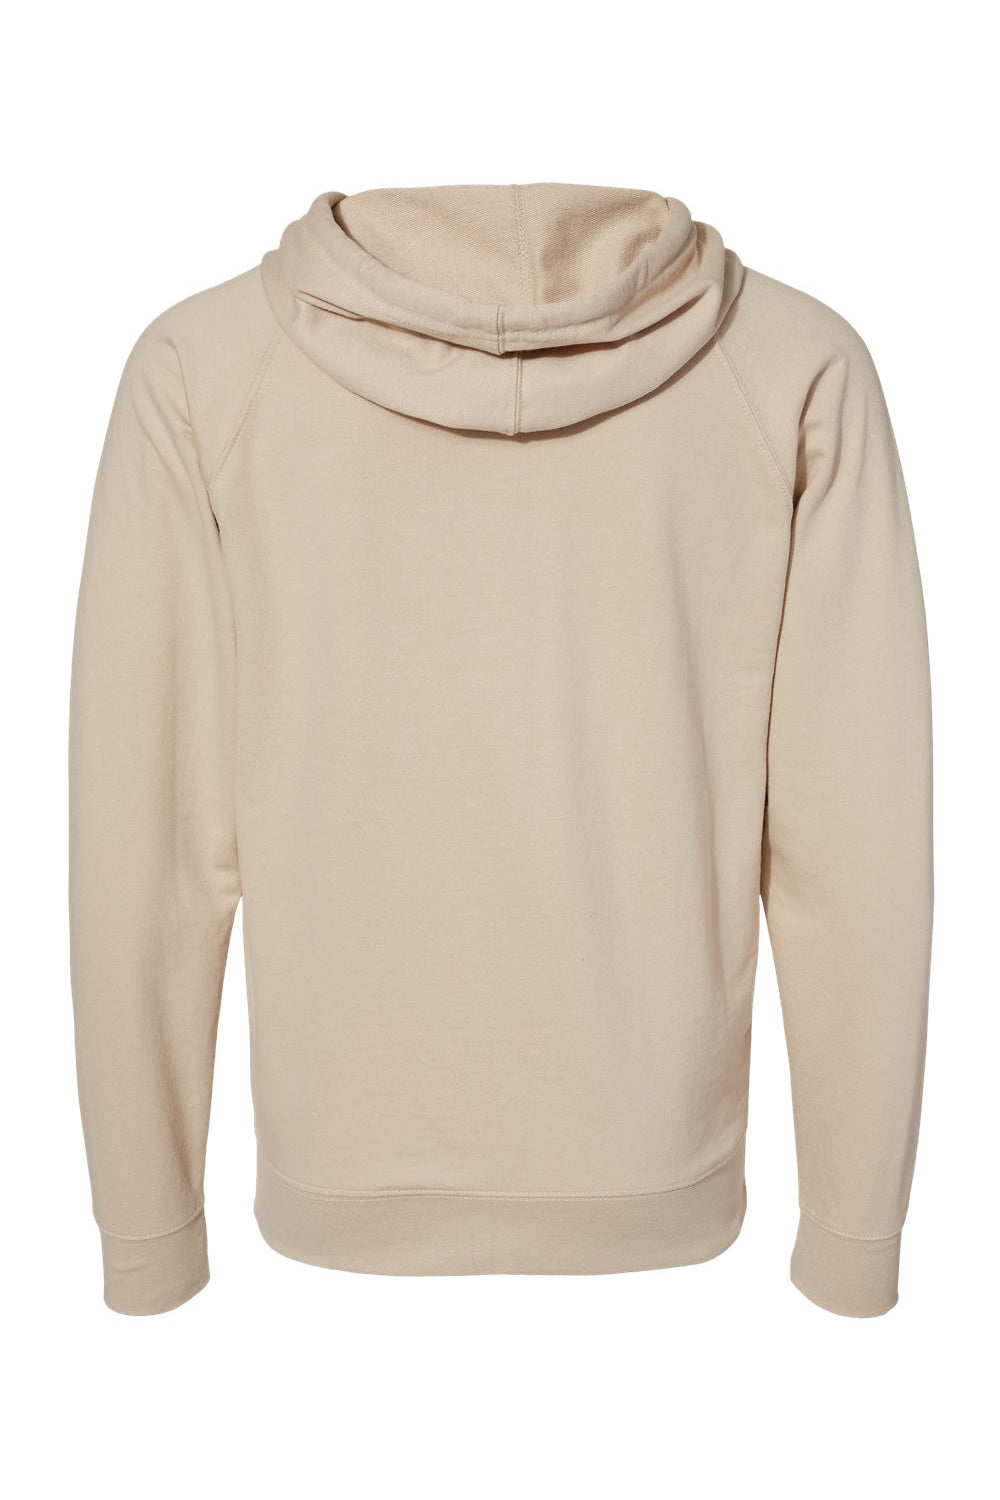 Independent Trading Co. SS1000Z Mens Icon Loopback Terry Full Zip Hooded Sweatshirt Hoodie Sand Flat Back